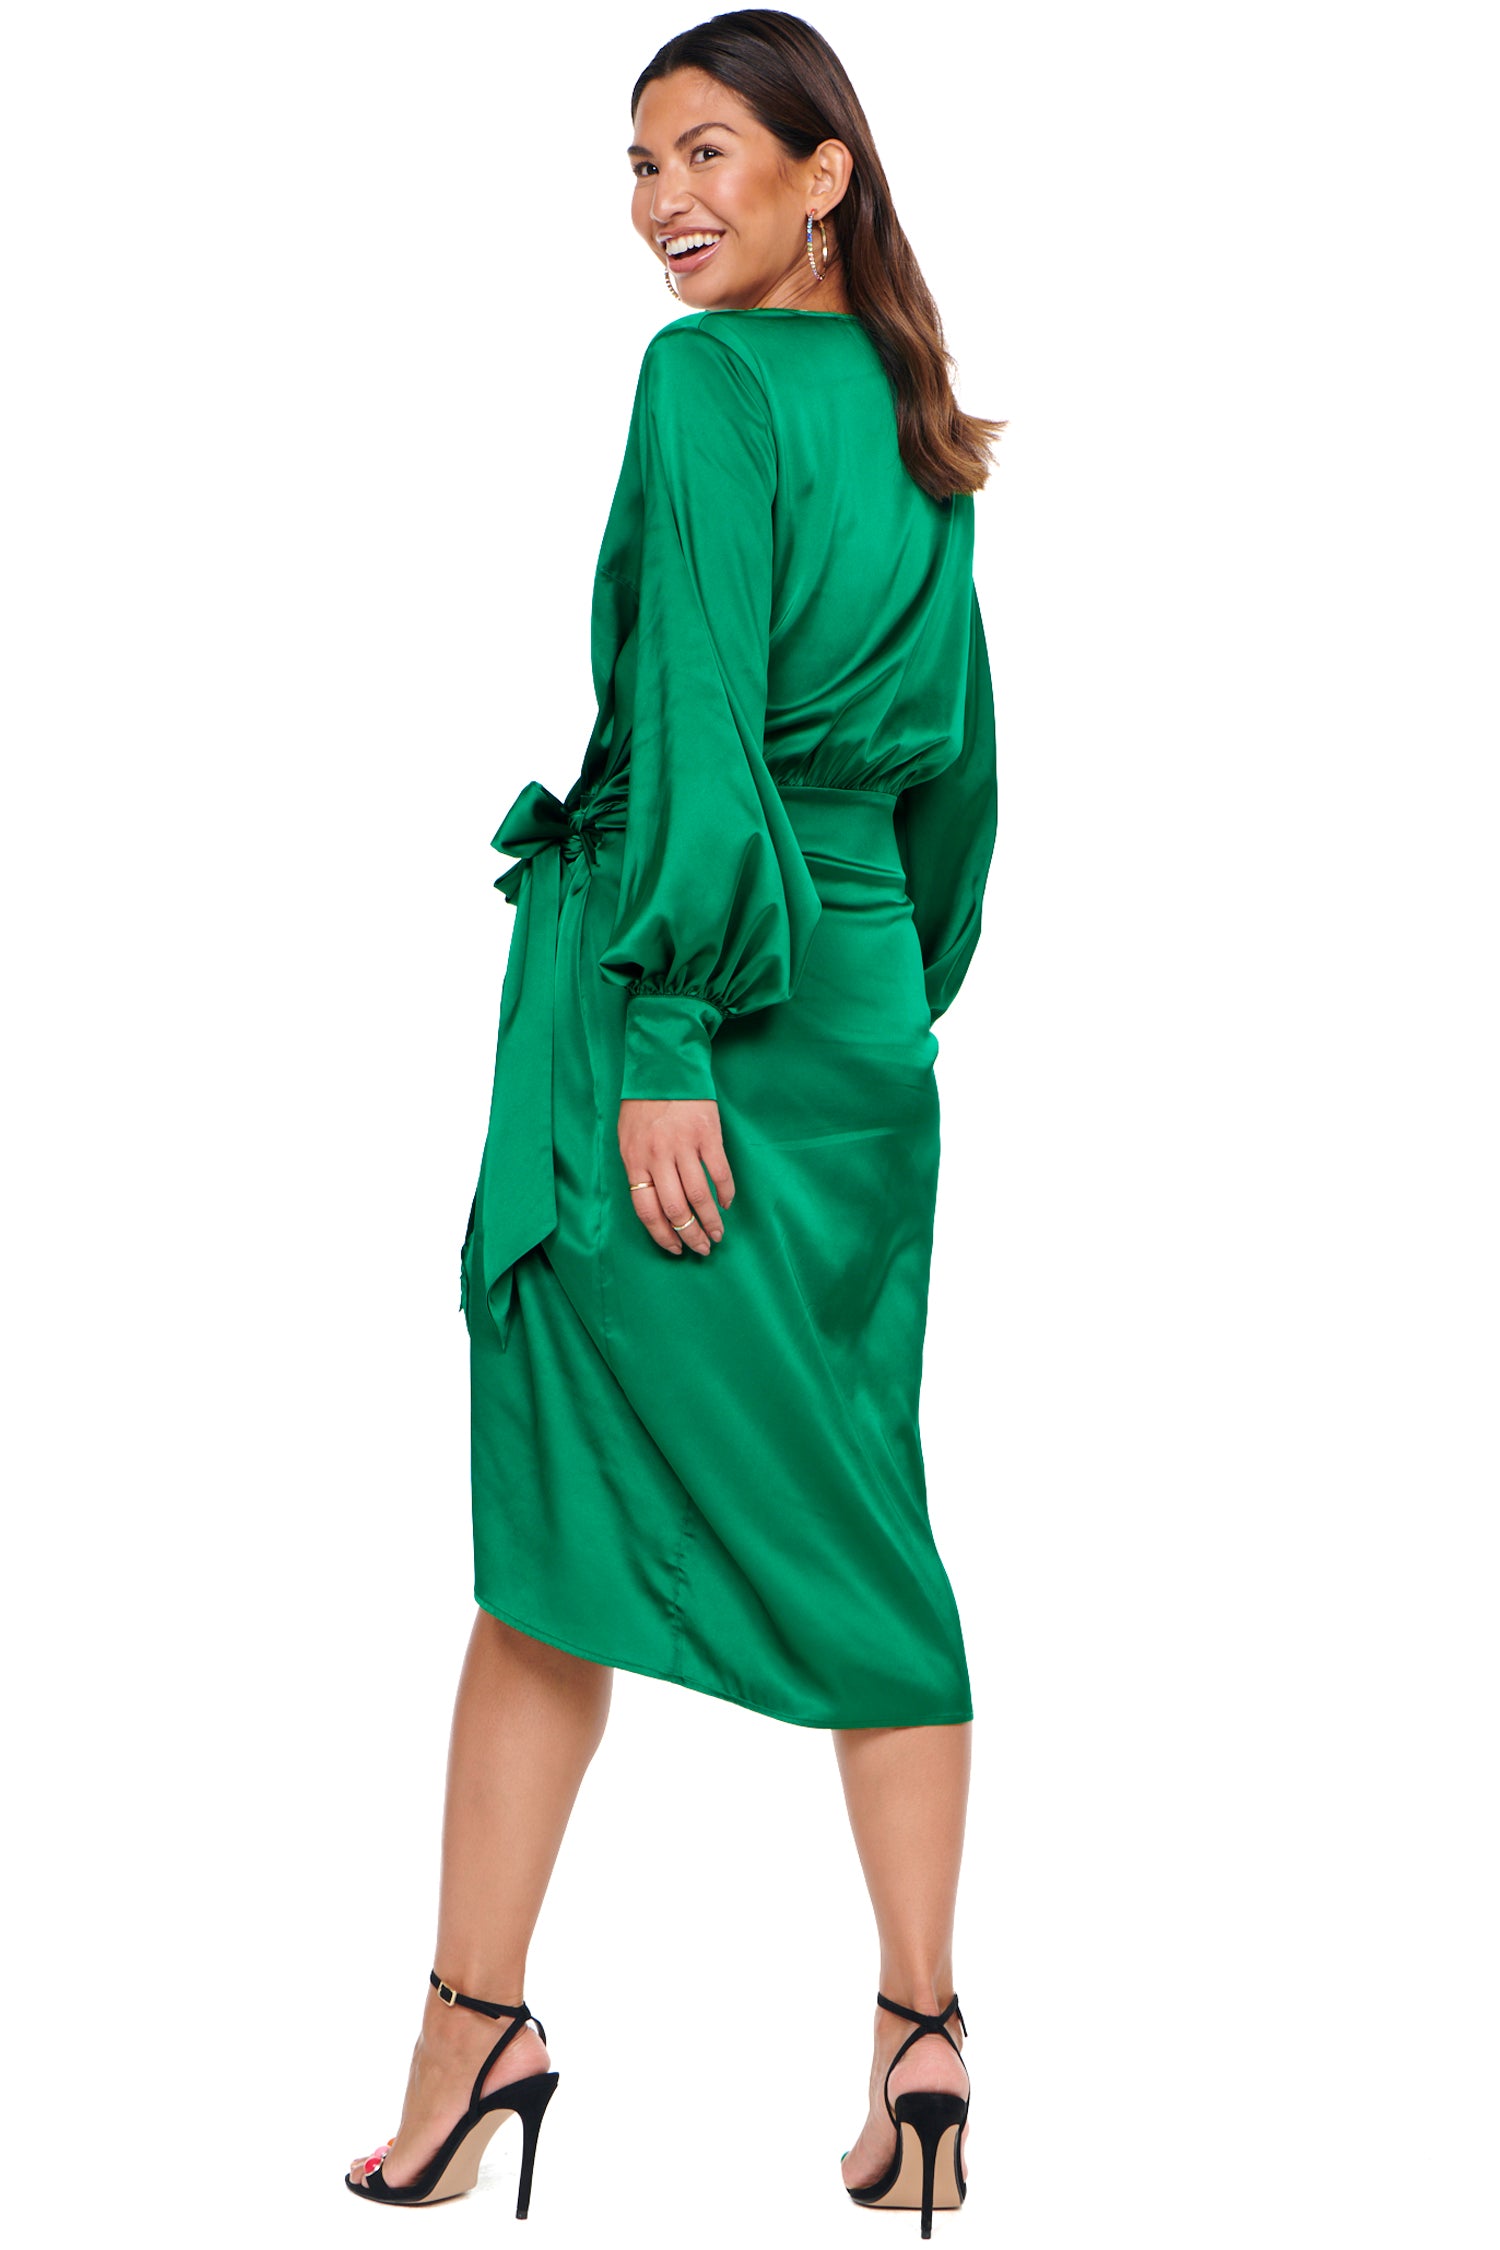 Model wearing Green Vienna Midi Dress standing facing away from the camera